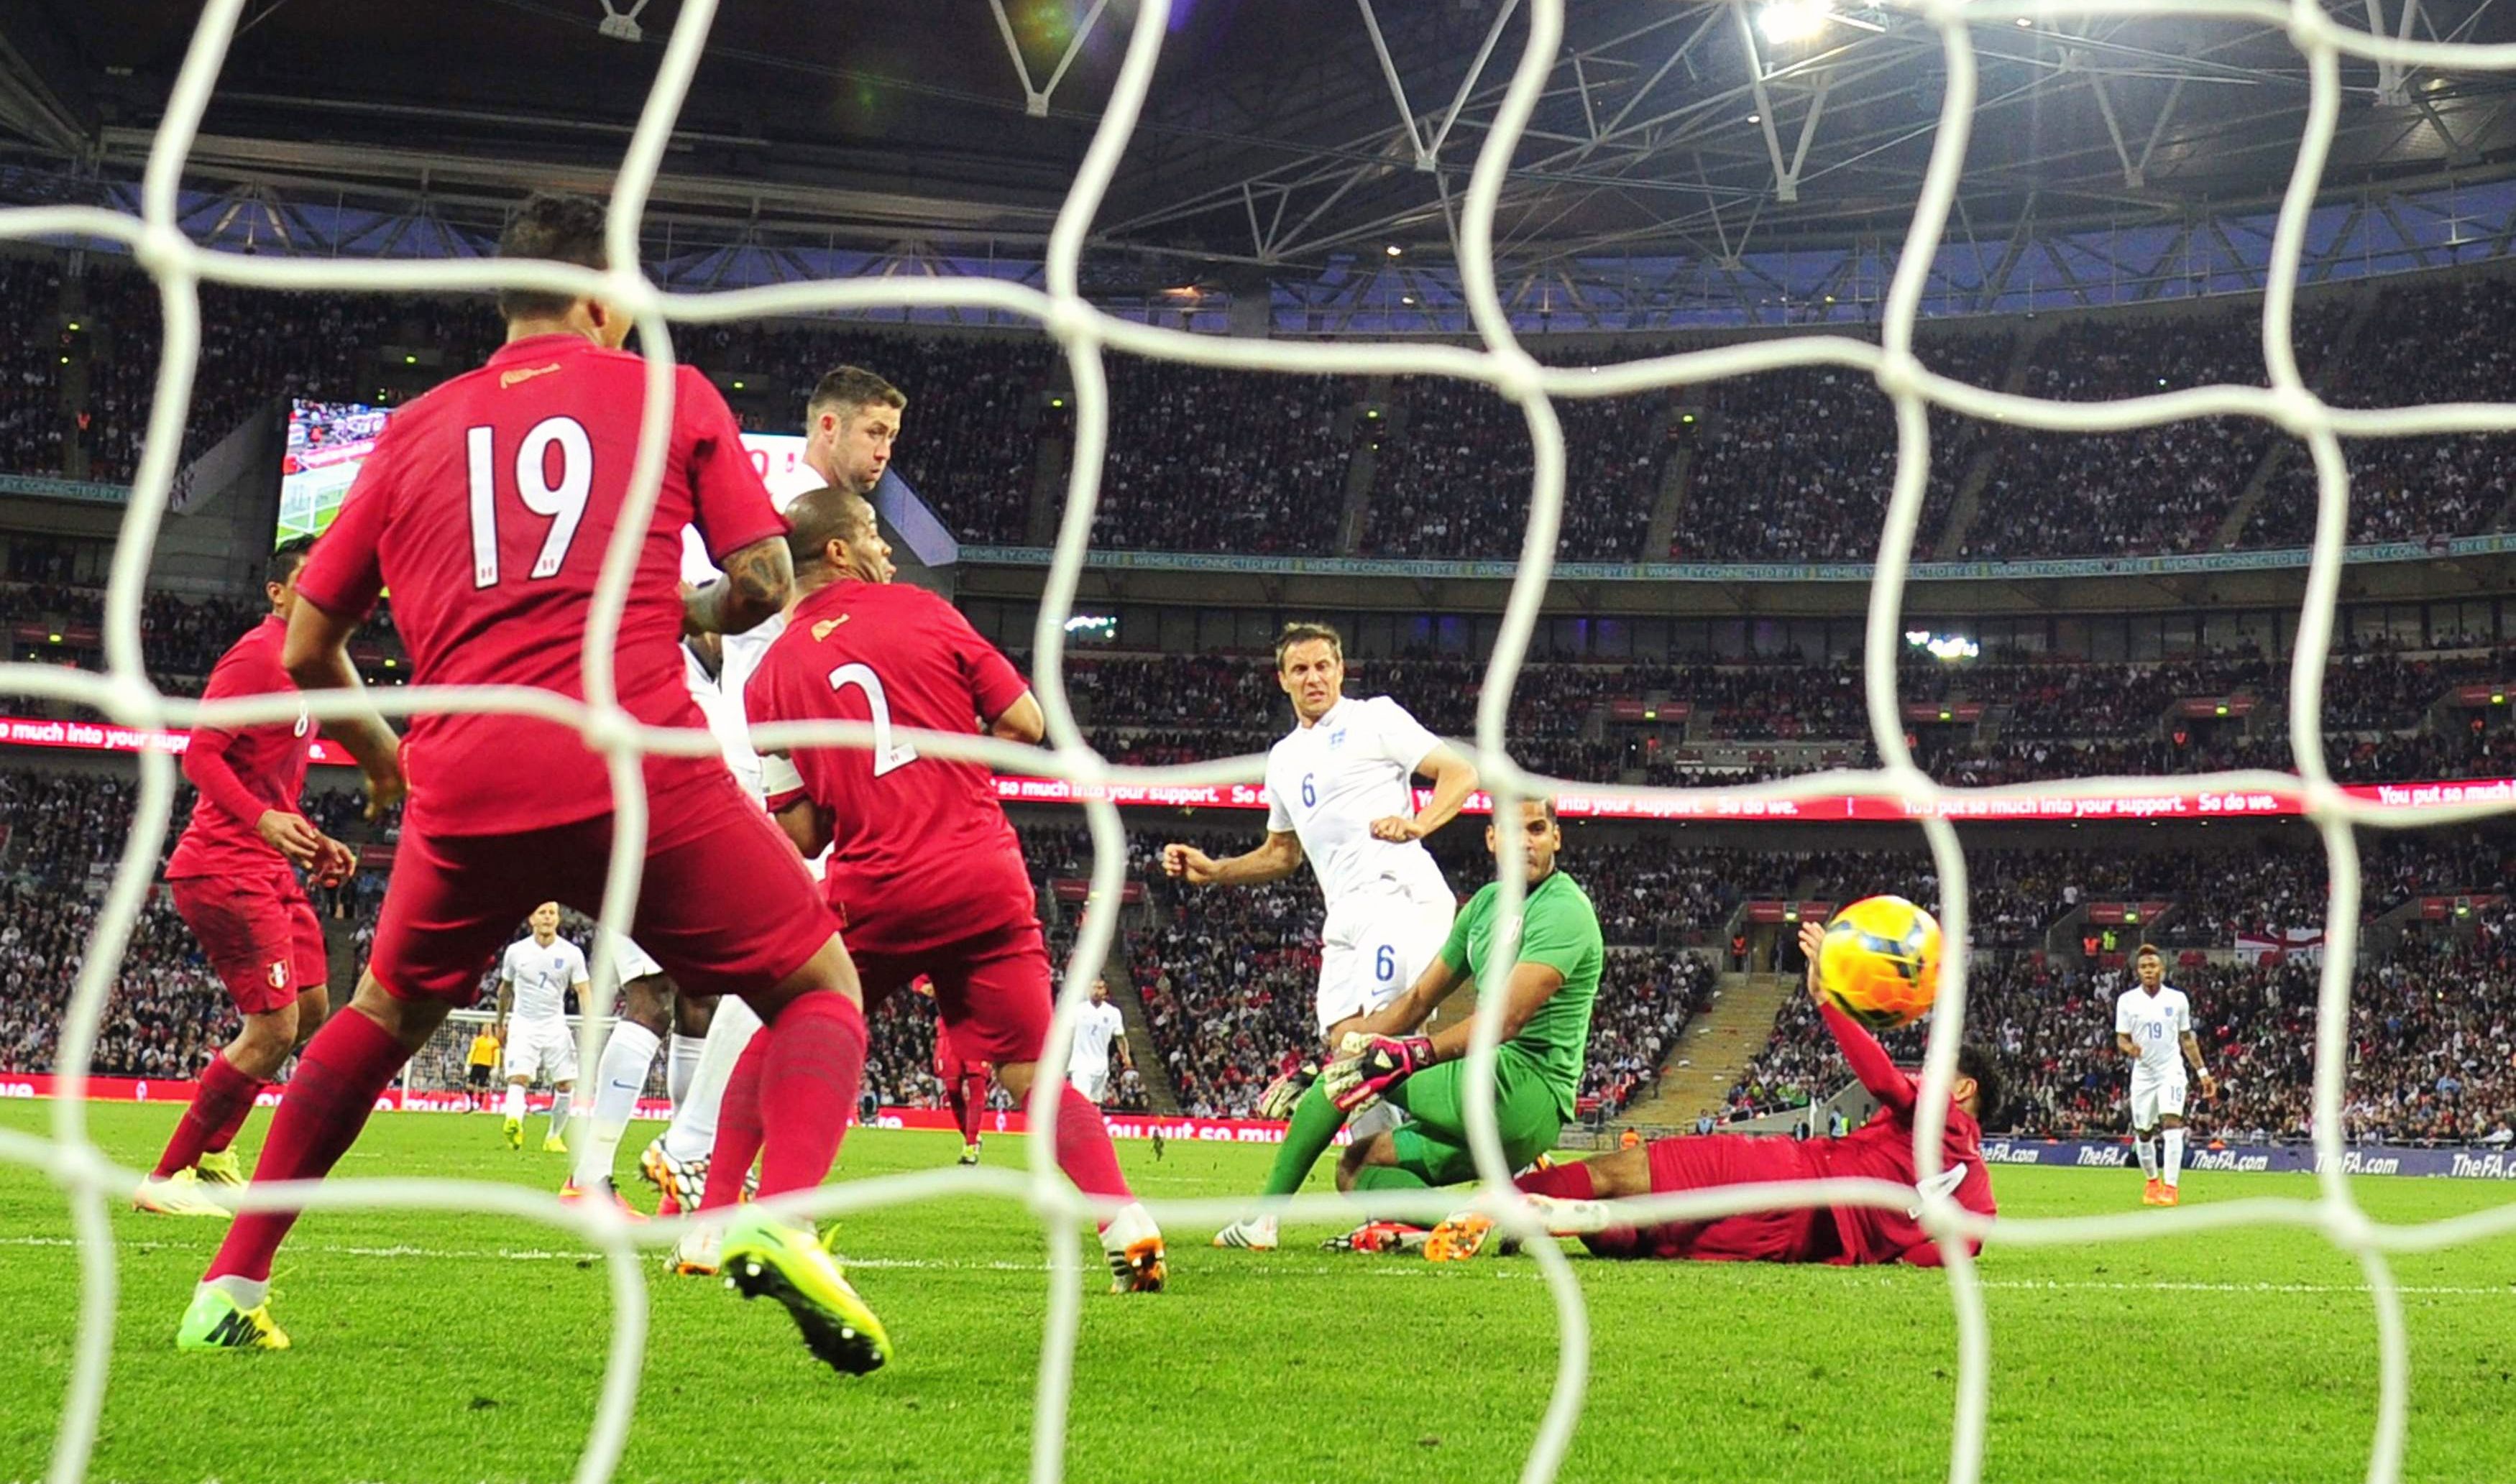 England's Phil Jagielka (C, number 6) scores against Peru during their international friendly soccer match at Wembley Stadium in London May 30, 2014. REUTERS/Dylan Martinez (BRITAIN - Tags: SPORT SOCCER WORLD CUP)